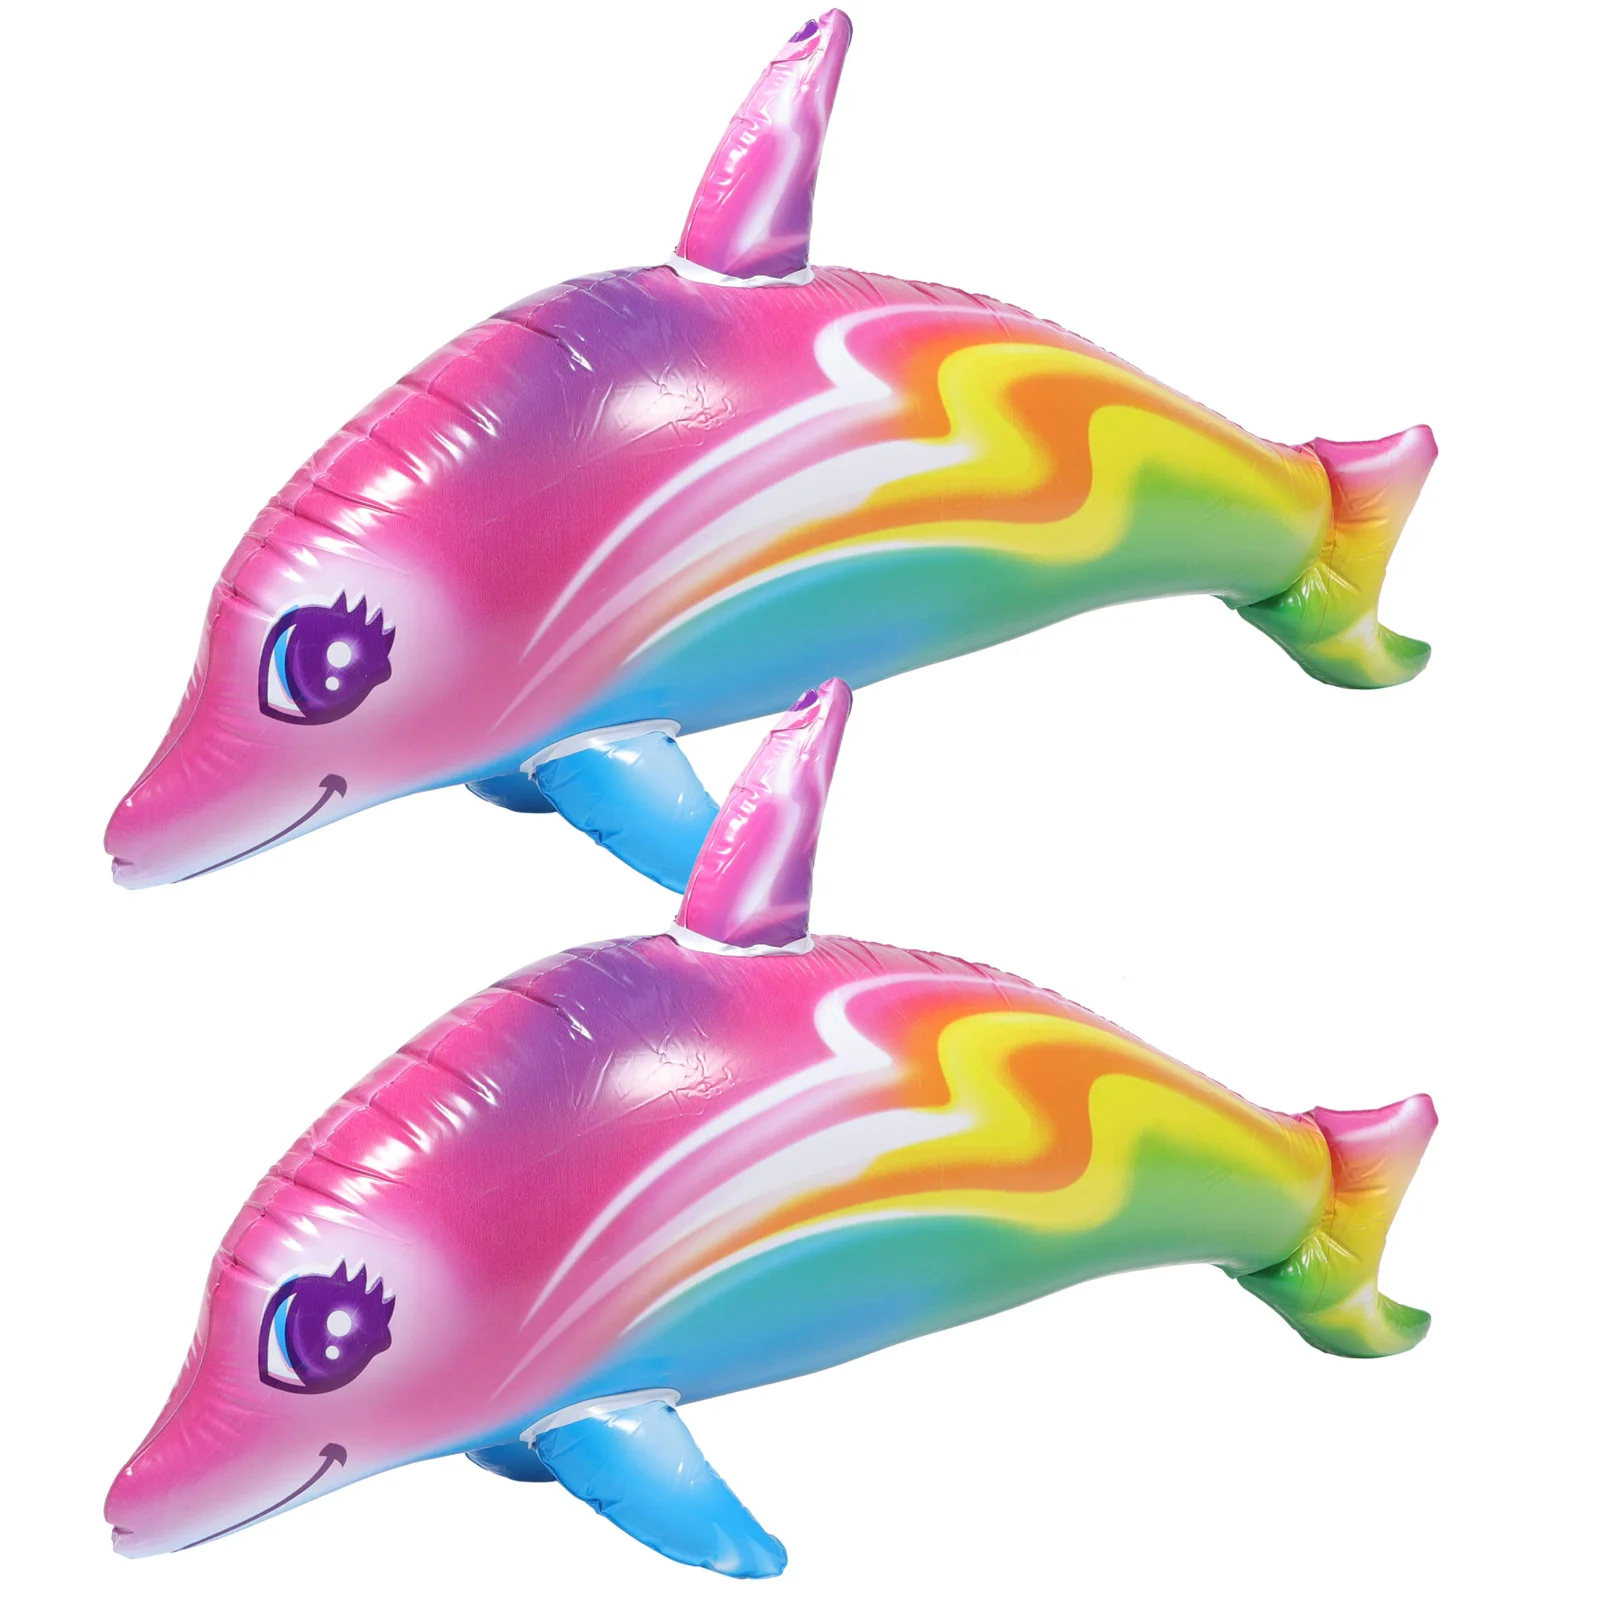 

2 Pcs Inflatable Dolphin Toy Party Favors Children Giant Mermaid Toys Swimming Pool Learning Beach Kids Educational Ball balls